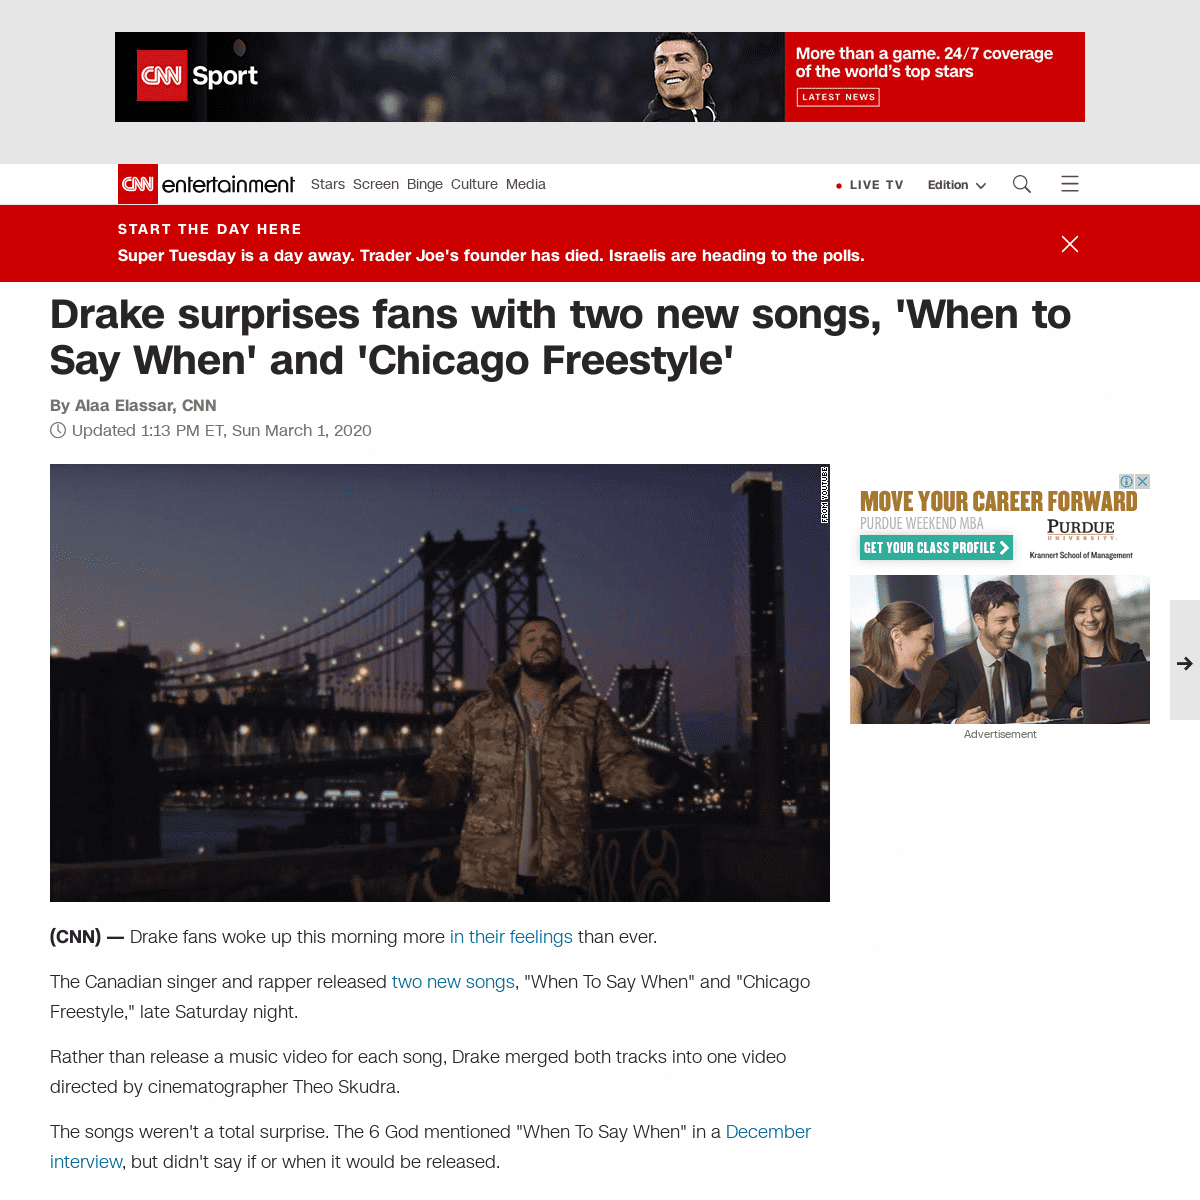 A complete backup of www.cnn.com/2020/03/01/entertainment/drake-when-to-say-when-chicago-freestyle-new-trnd/index.html